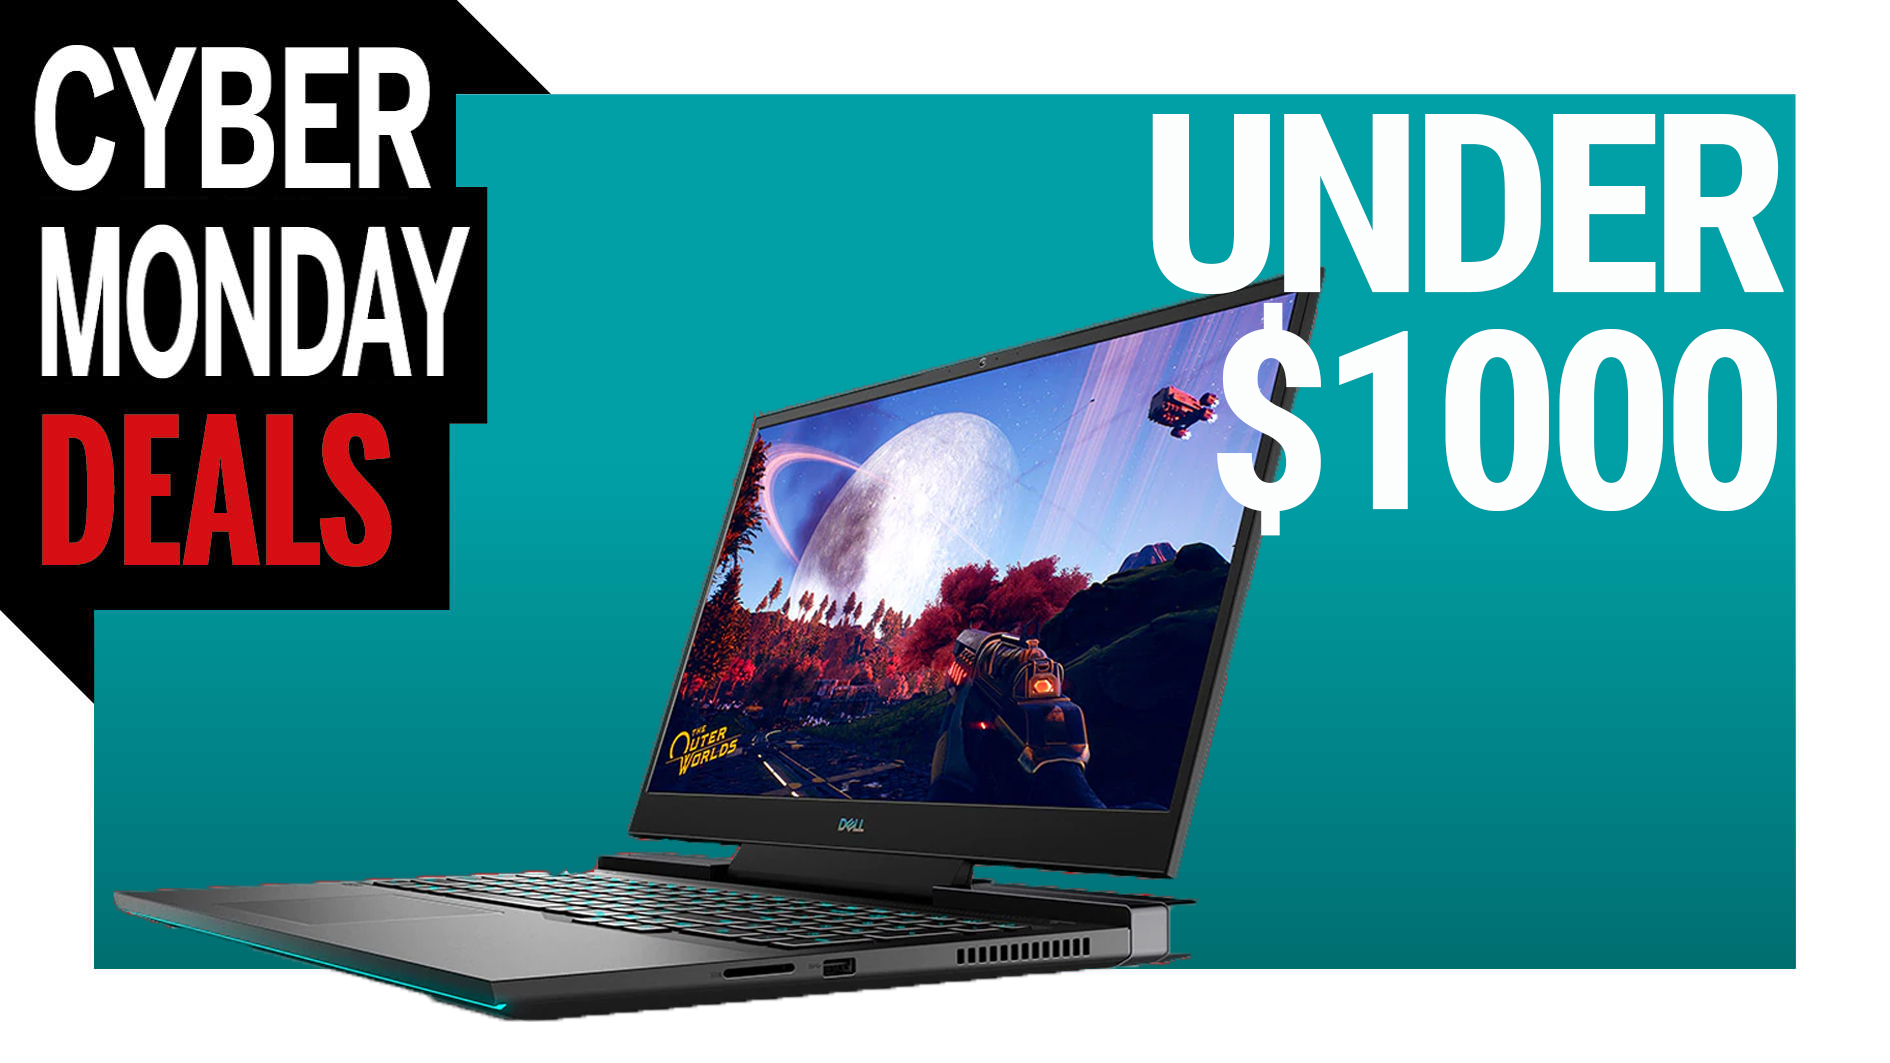  The best Cyber Monday gaming laptop deals for under $1000 